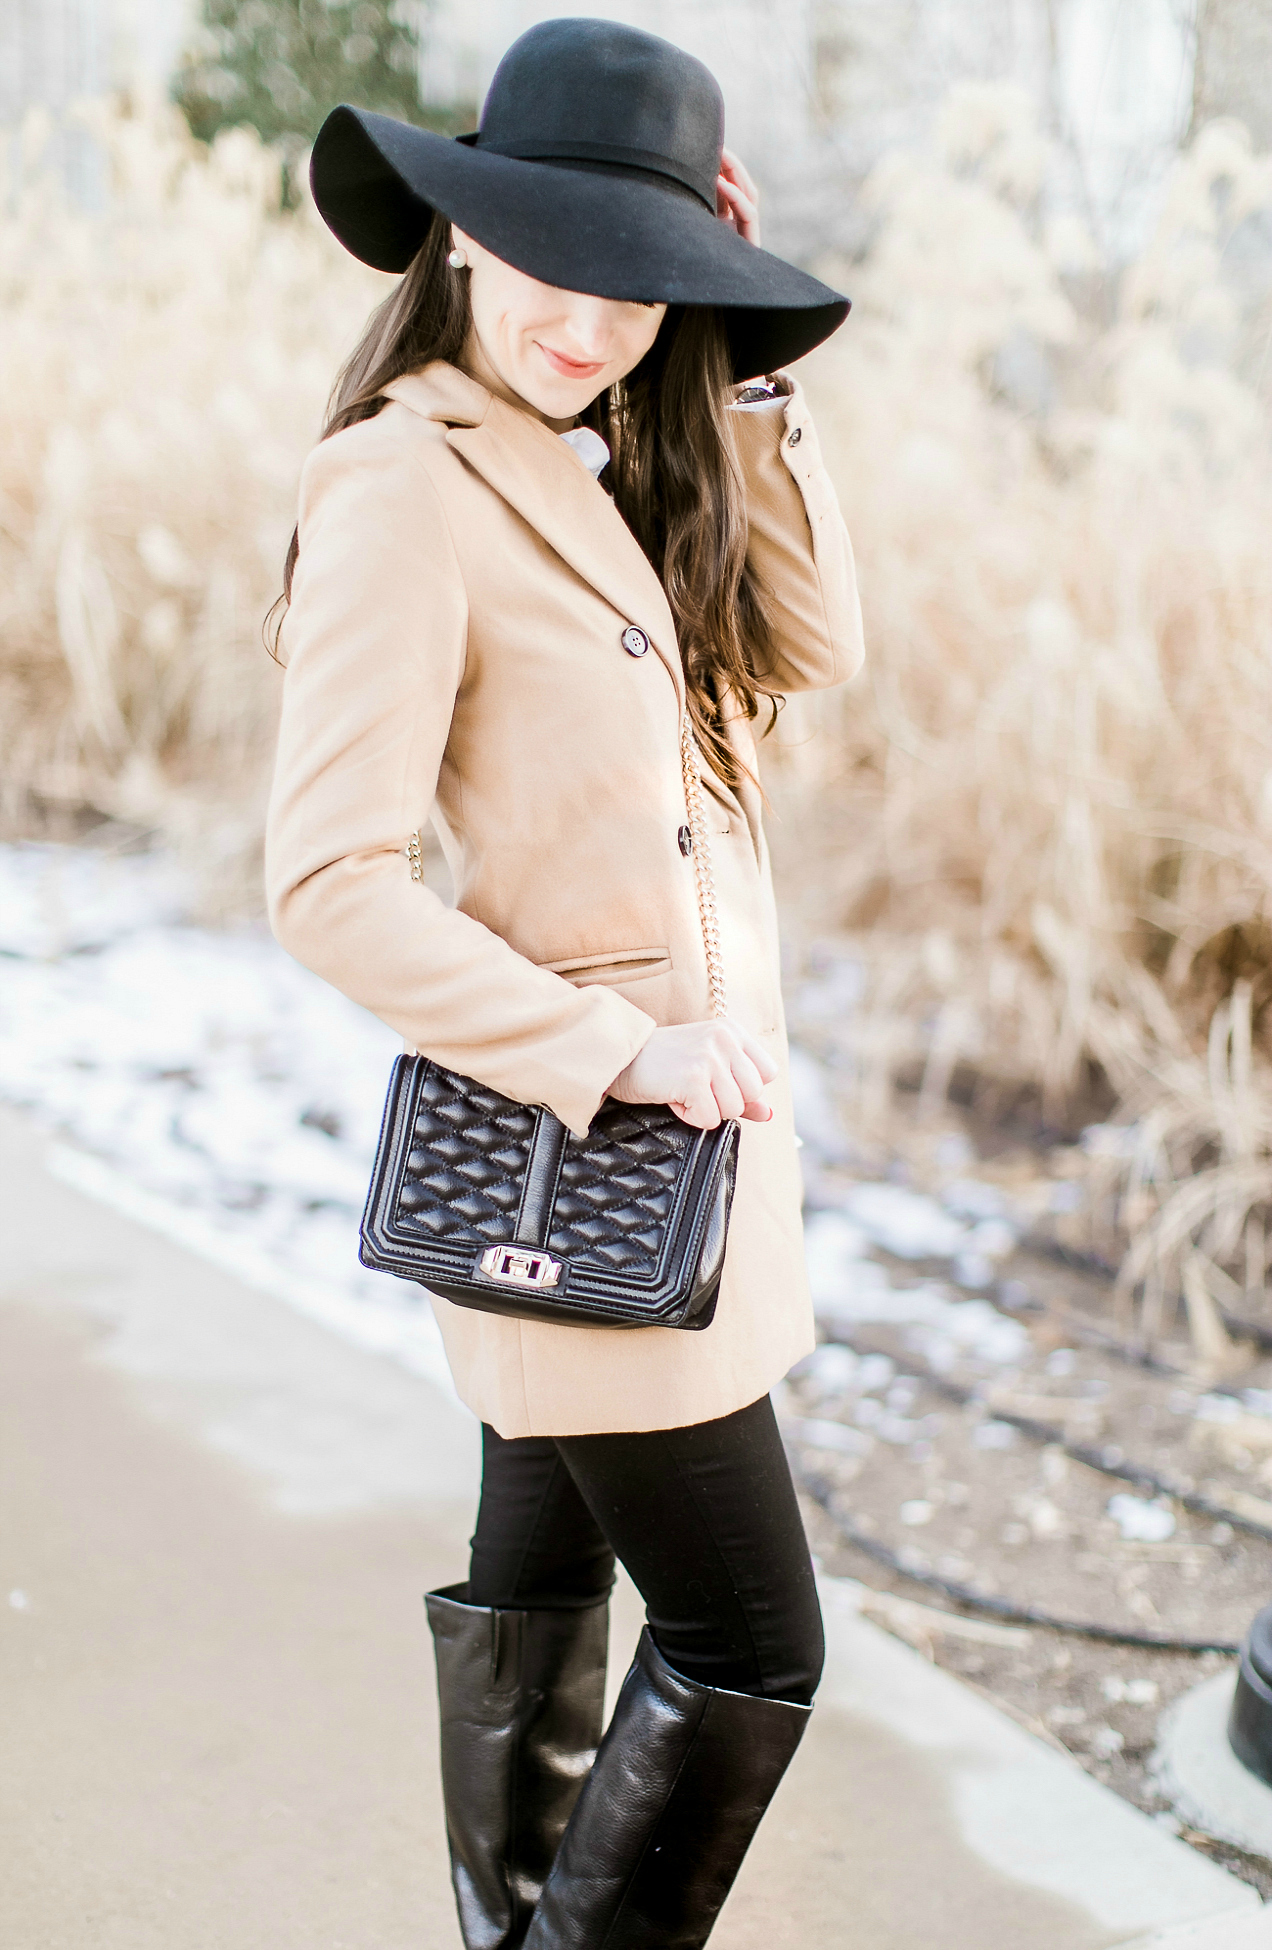 Affordable camel coat from Shein worn with black Mott and Bow skinny jeans, J.Crew Factory leopard crewneck sweater, J.Crew Factory white oxford, Sakkas black wool floppy hat, Nine West black tall boots, and Rebecca Minkoff Love Crossbody purse styled by fashion blogger Stephanie Ziajka from Diary of a Debutante